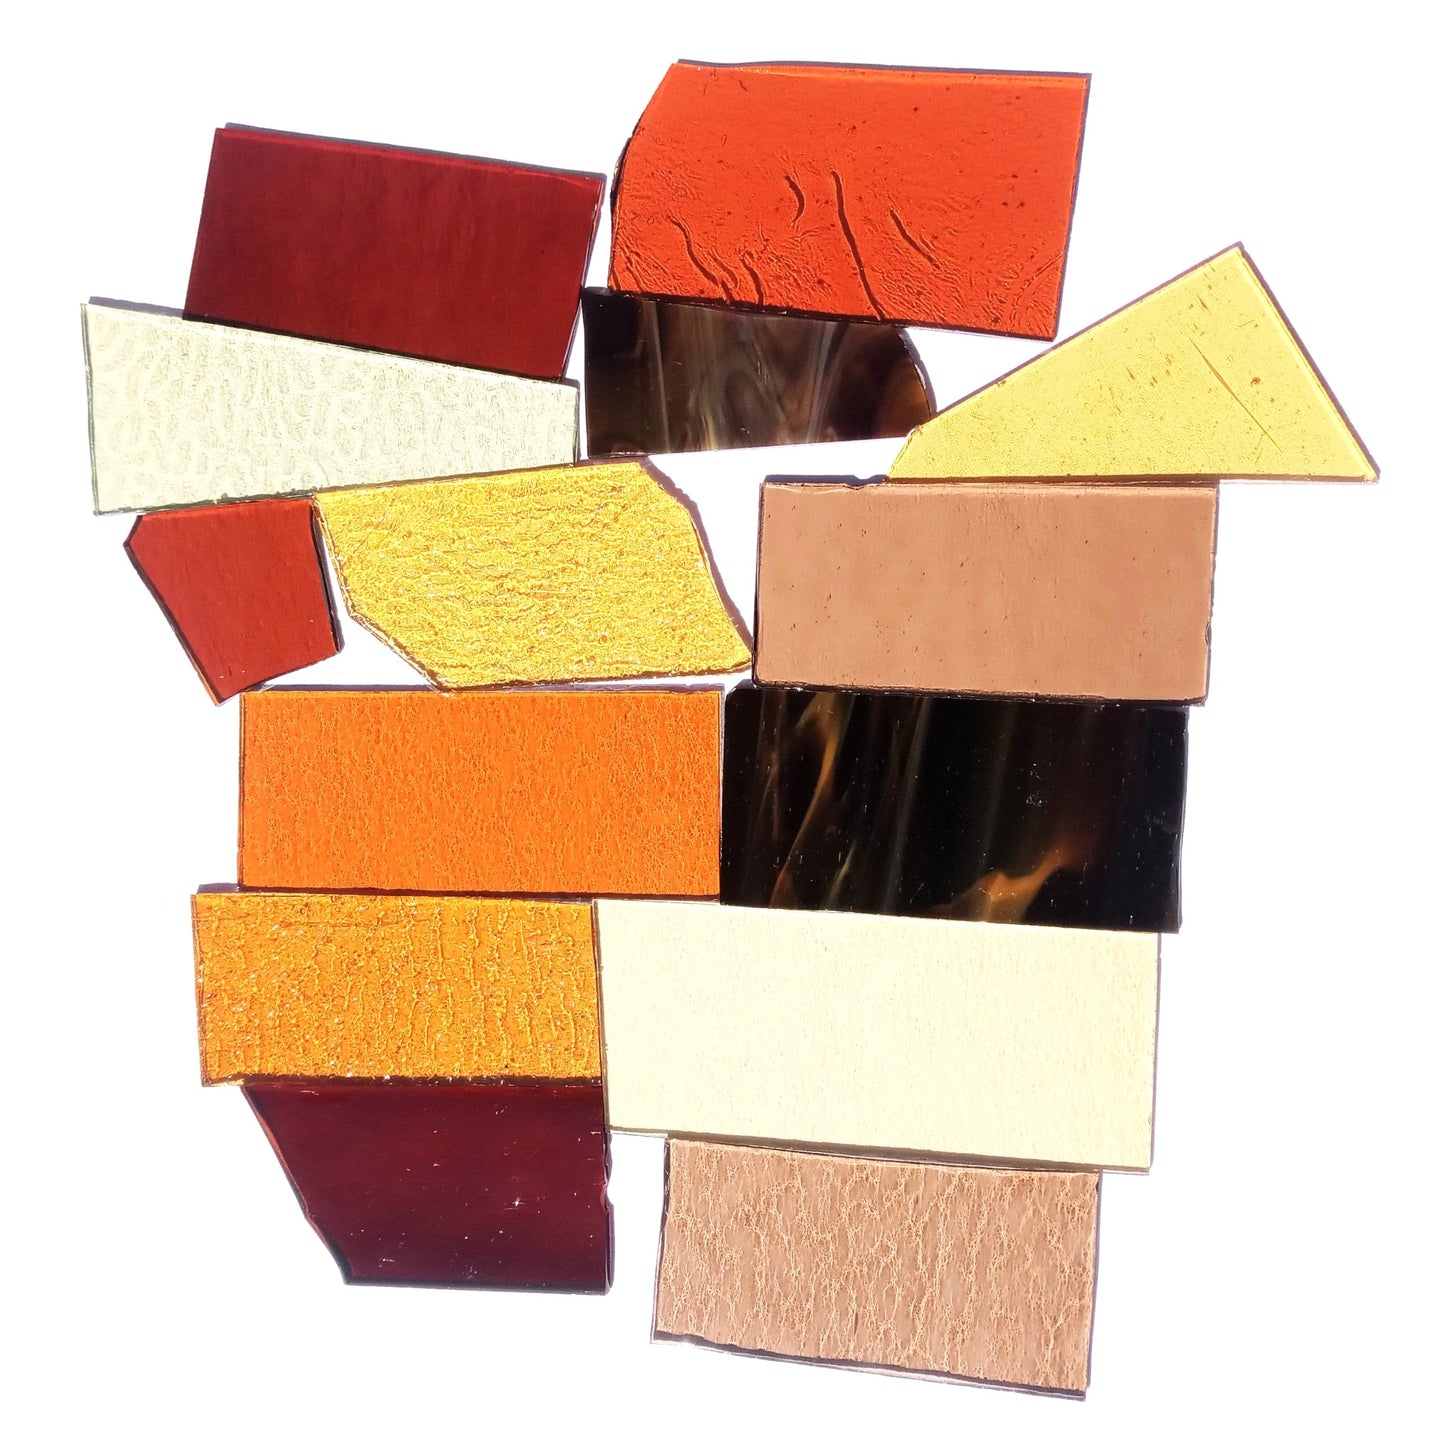 Brown Amber Stained Glass Scraps, Curated 1 lb Package of Reclaimed Shop Scrap Glass in Shades of Brown, Amber